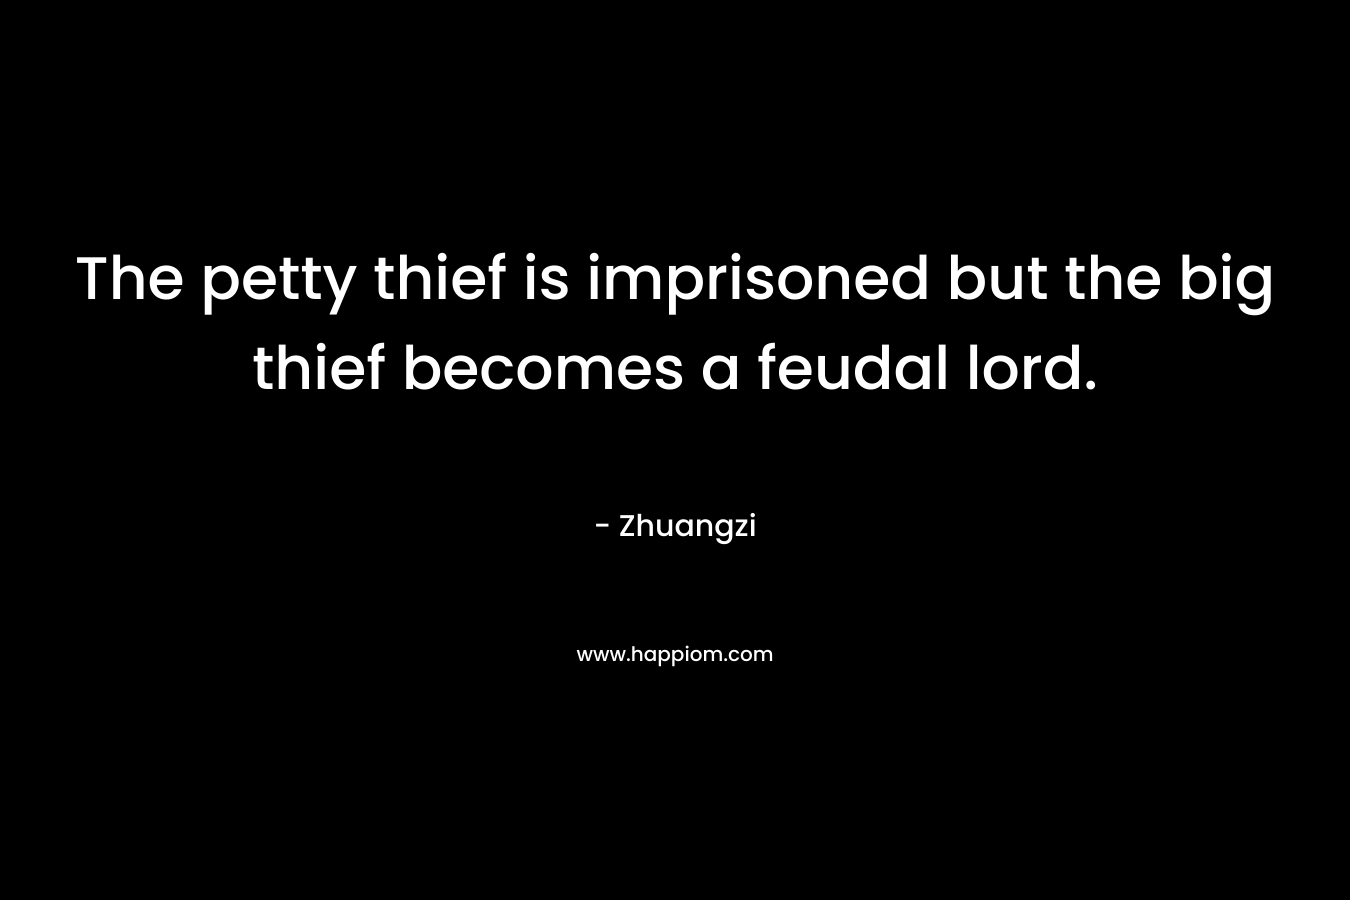 The petty thief is imprisoned but the big thief becomes a feudal lord.